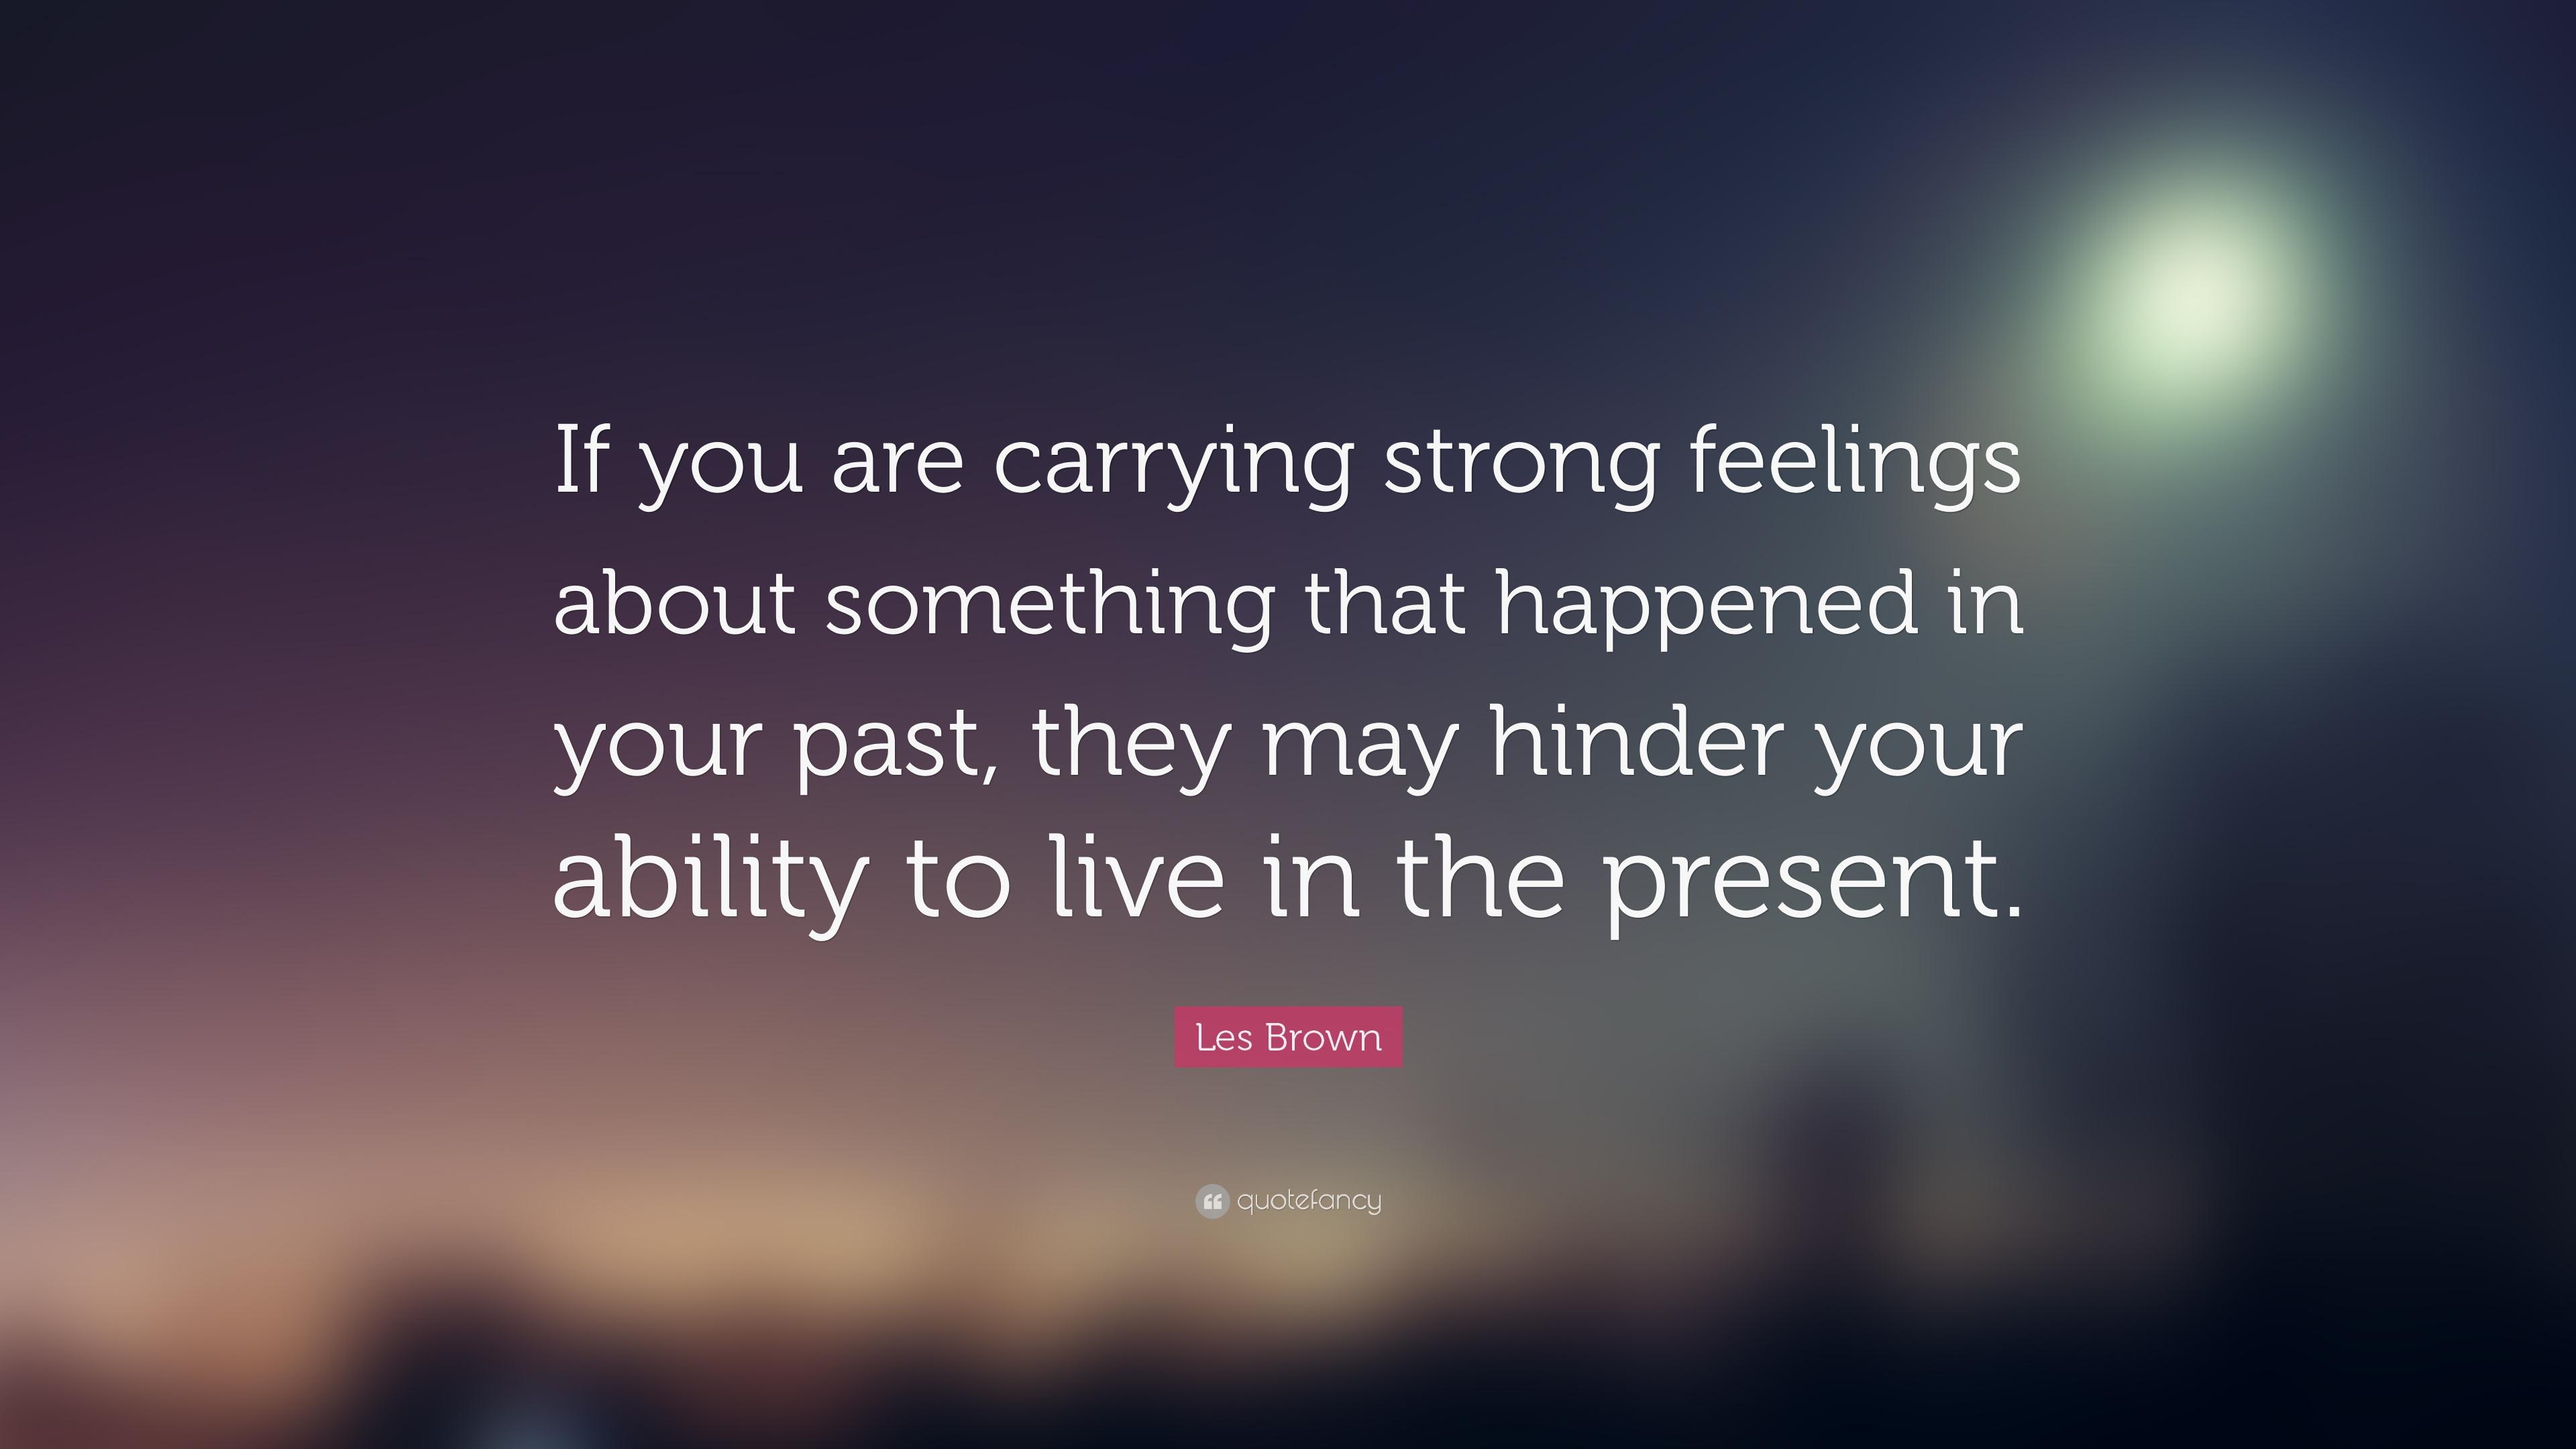 Les Brown Quote: “If you are carrying strong feelings about